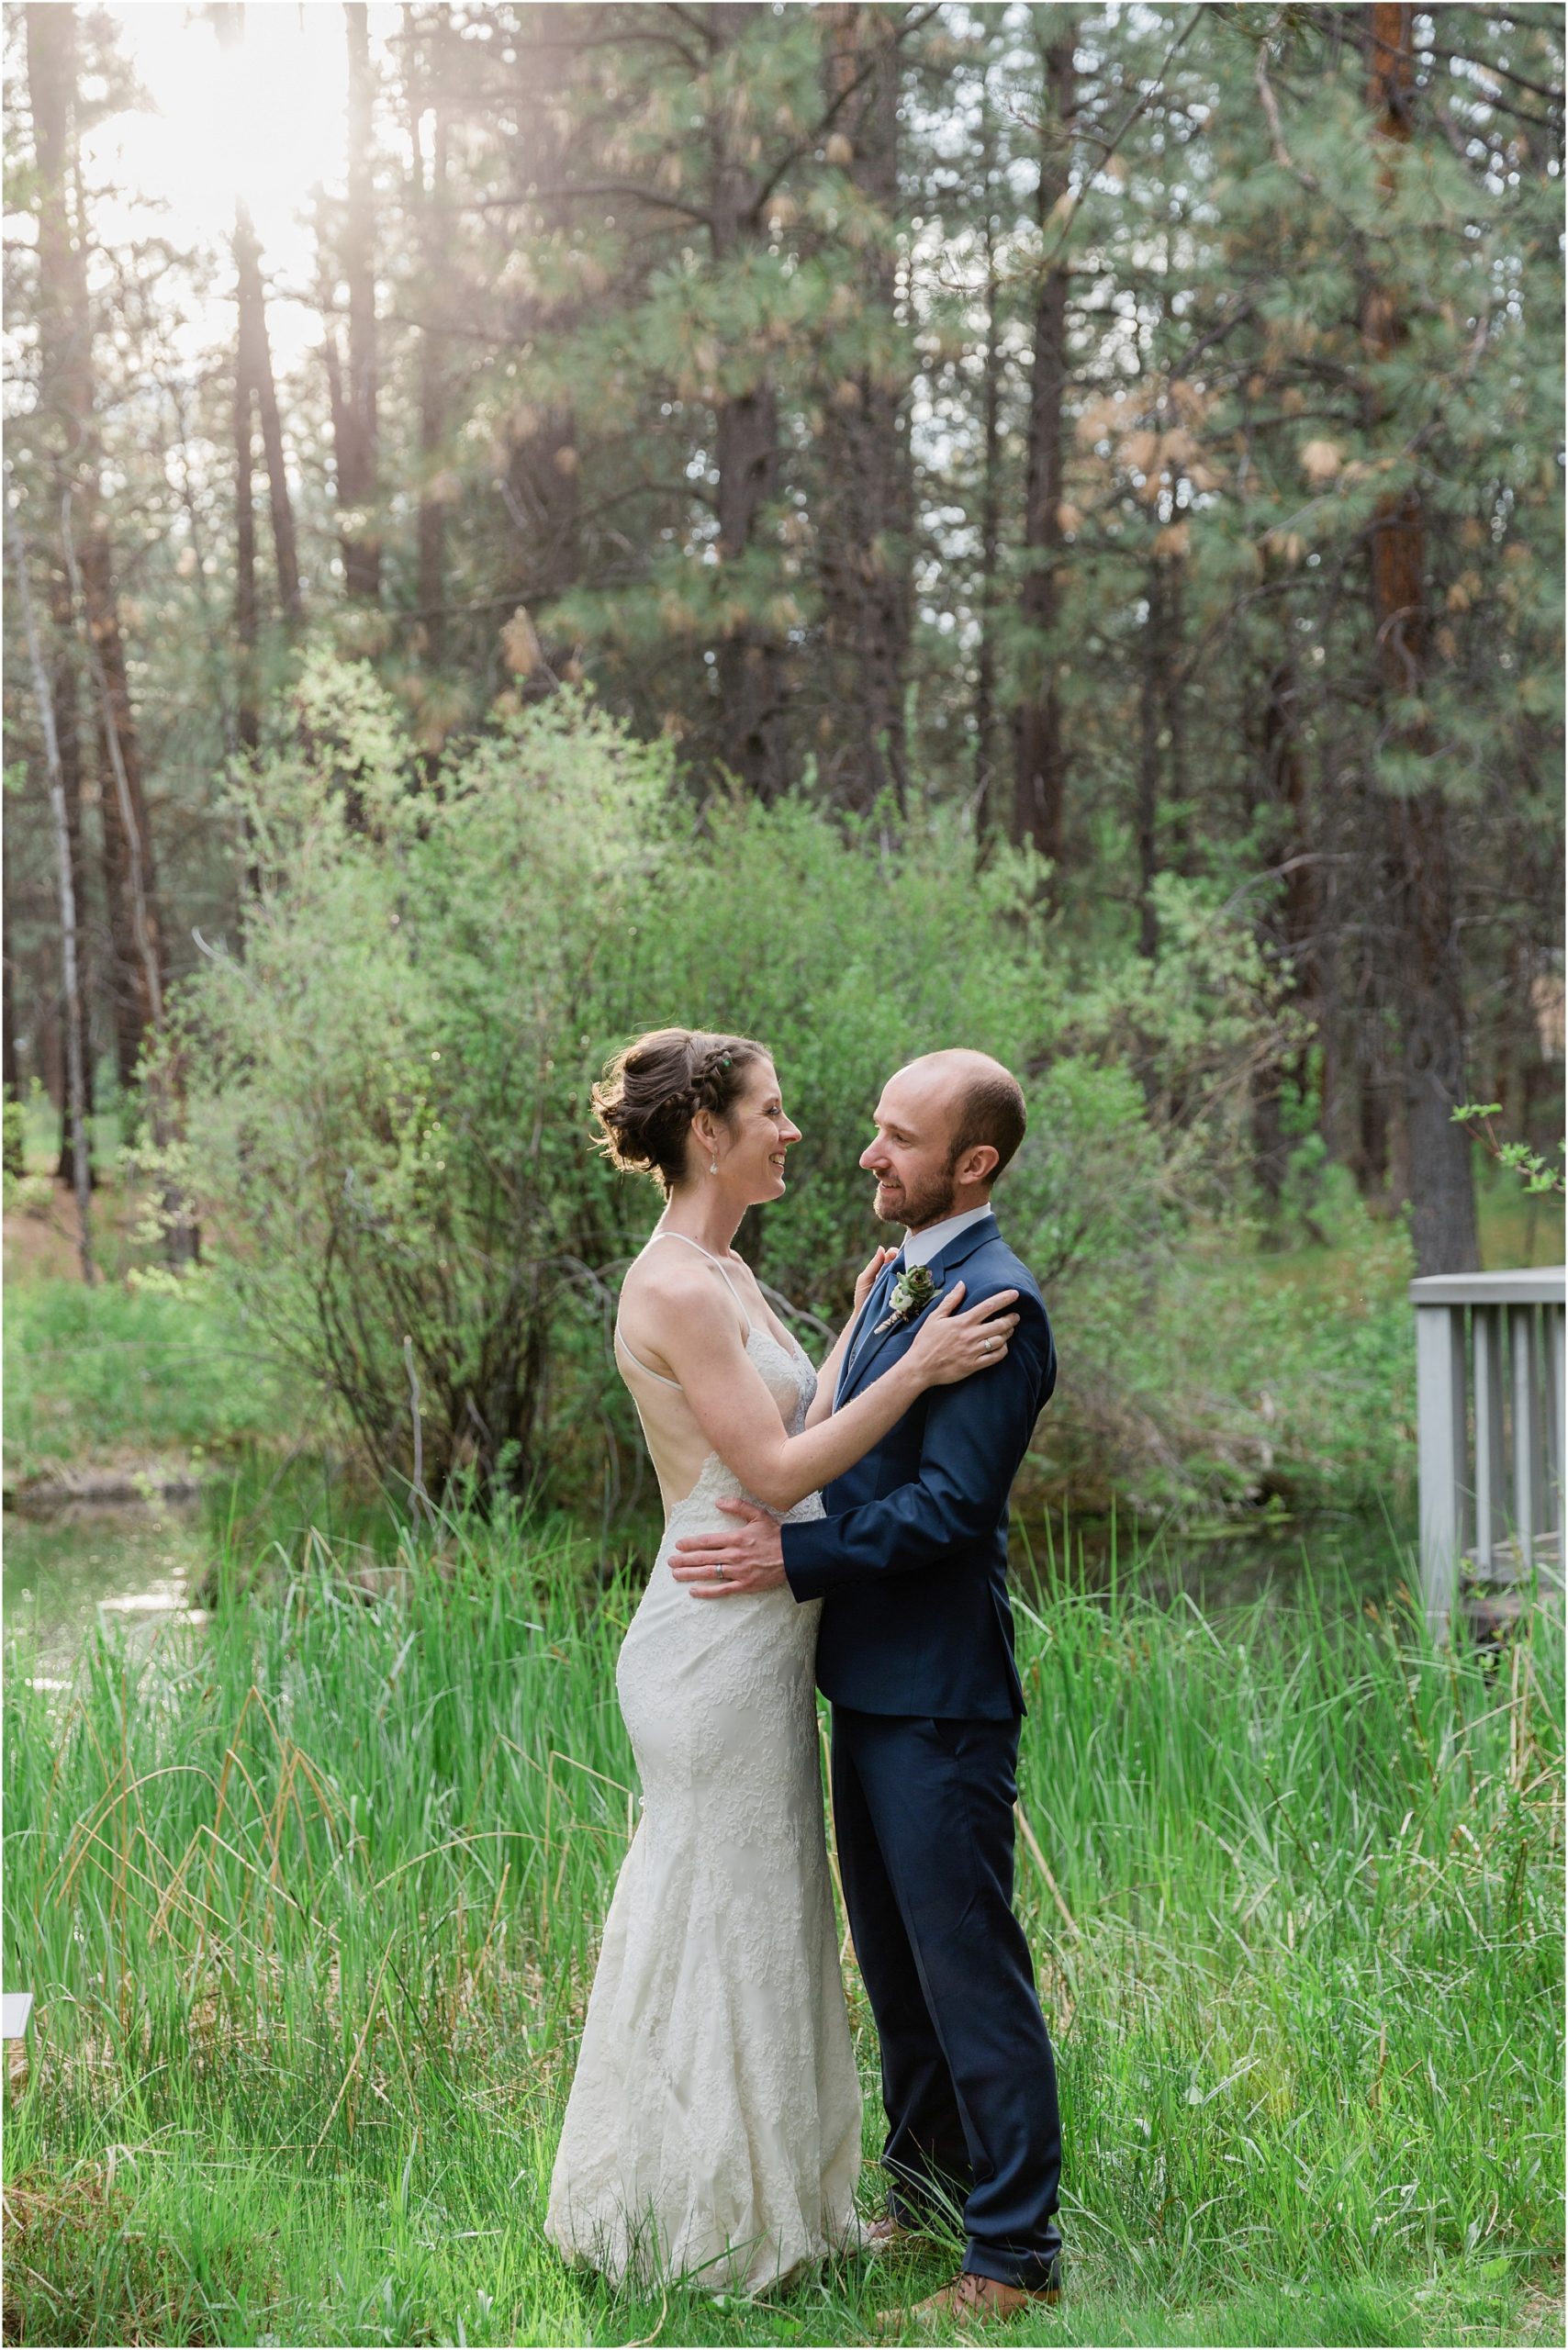 A newly married couple poses together amongst the pines and water feature at the gorgeous High Desert Museum wedding venue in Bend, OR. | Erica Swantek Photography